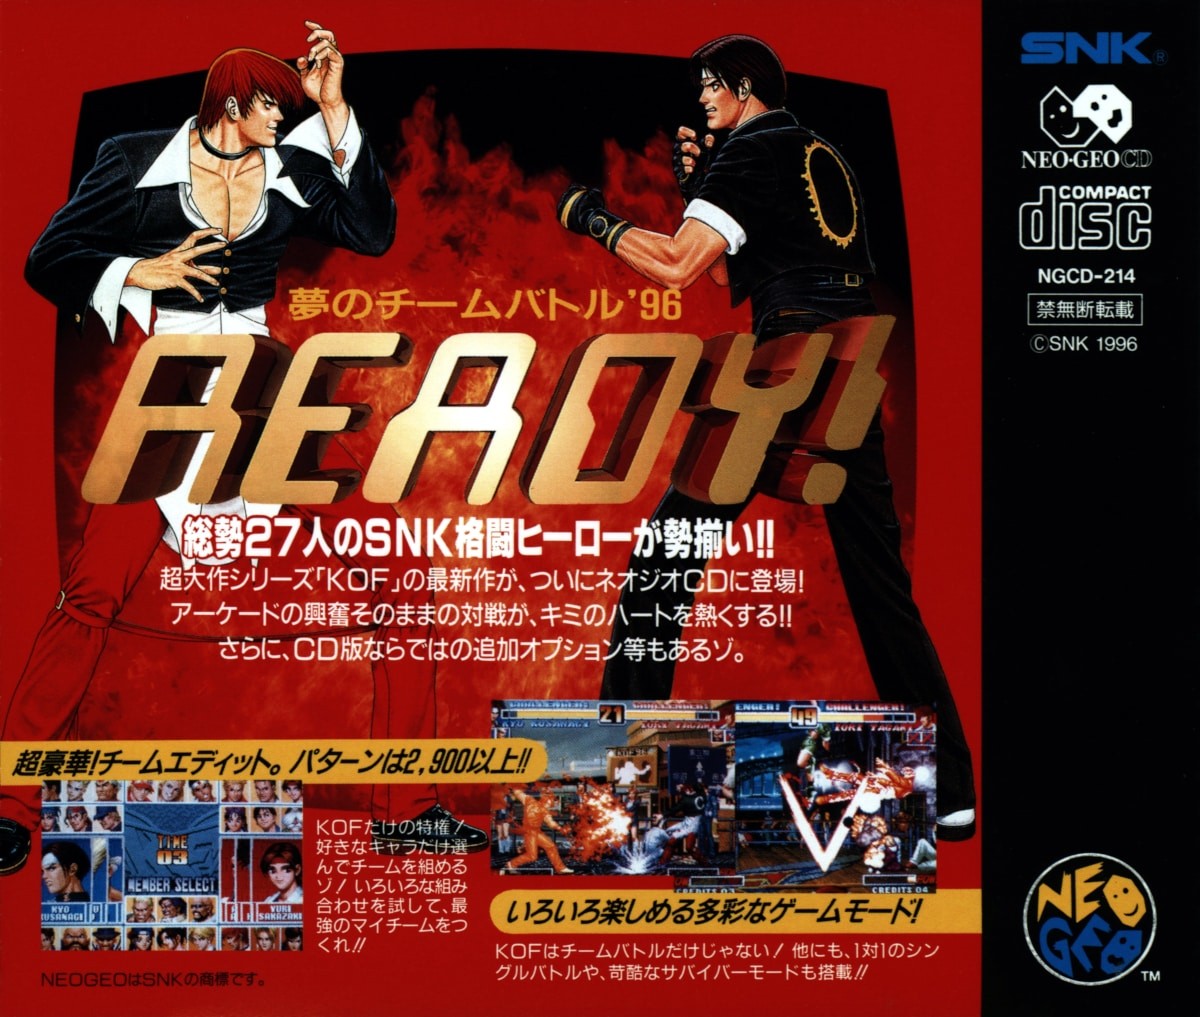 Capa do jogo The King of Fighters 96